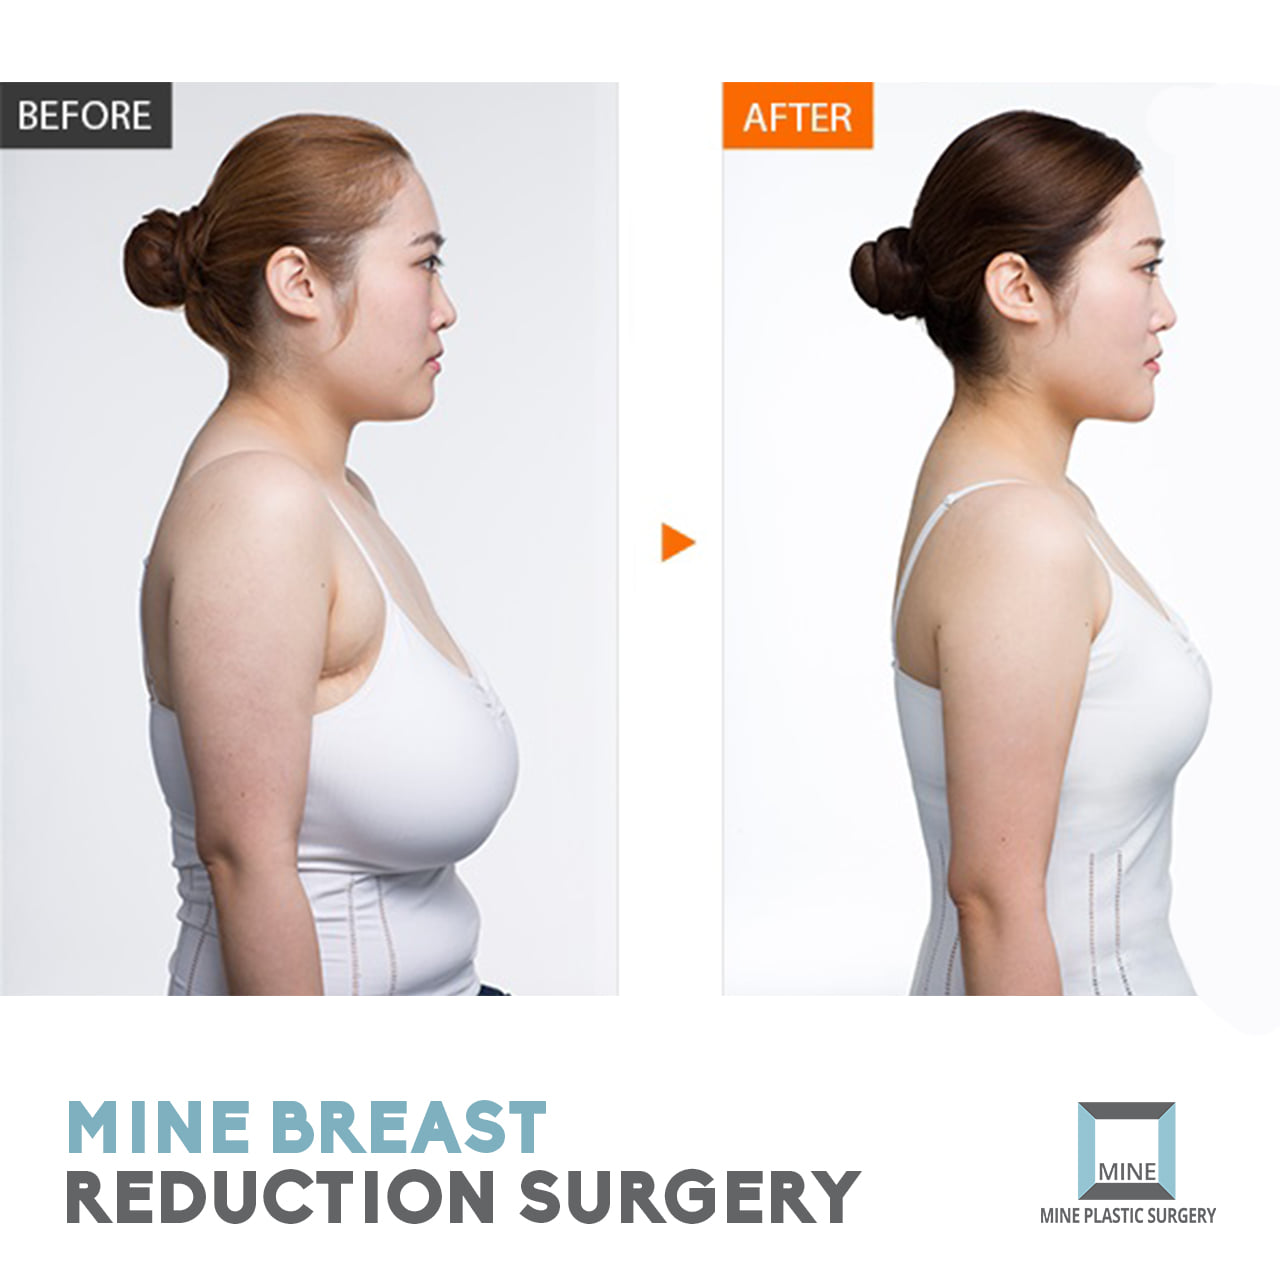 MINE Plastic Surgery on X: 'Breast Reduction Surgery' one of the